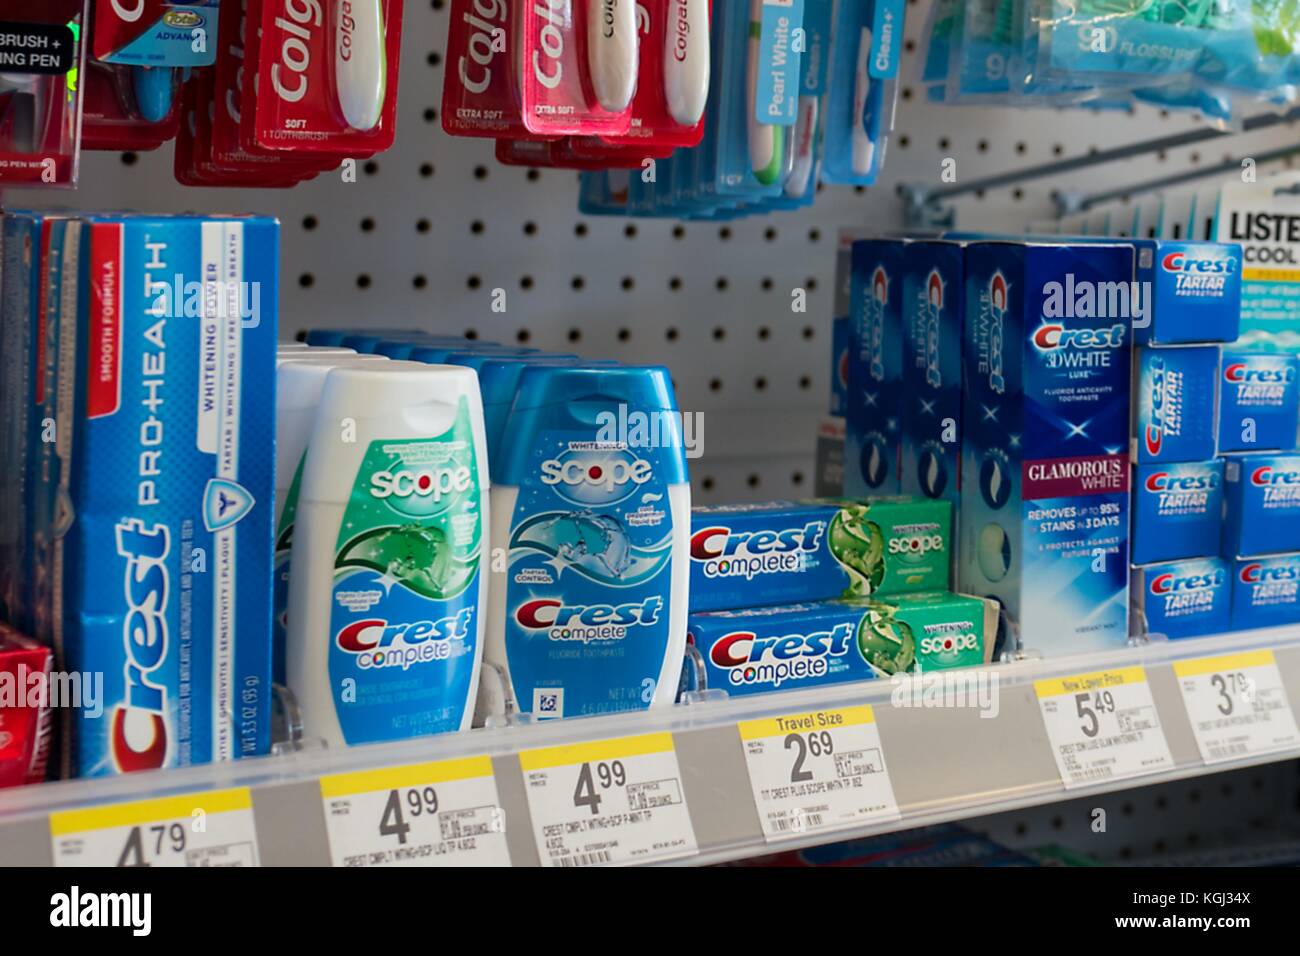 Close-up of various Crest dental care products, manufactured by American conglomerate Proctor and Gamble, on the shelves of a pharmacy in San Francisco, California, September 29, 2017. () Stock Photo